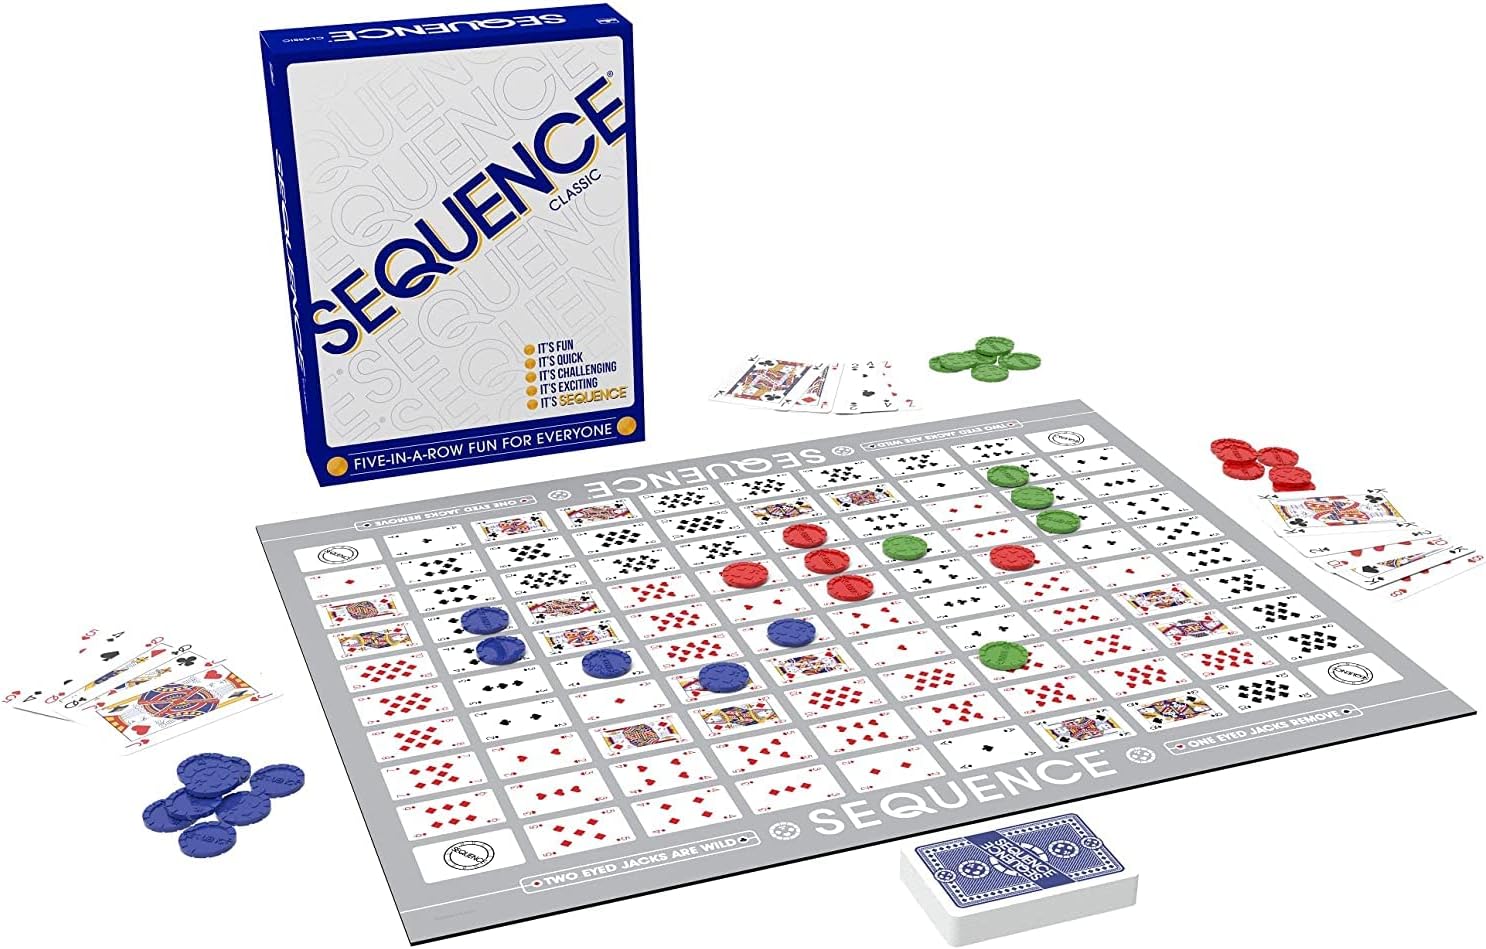 Sequence contents